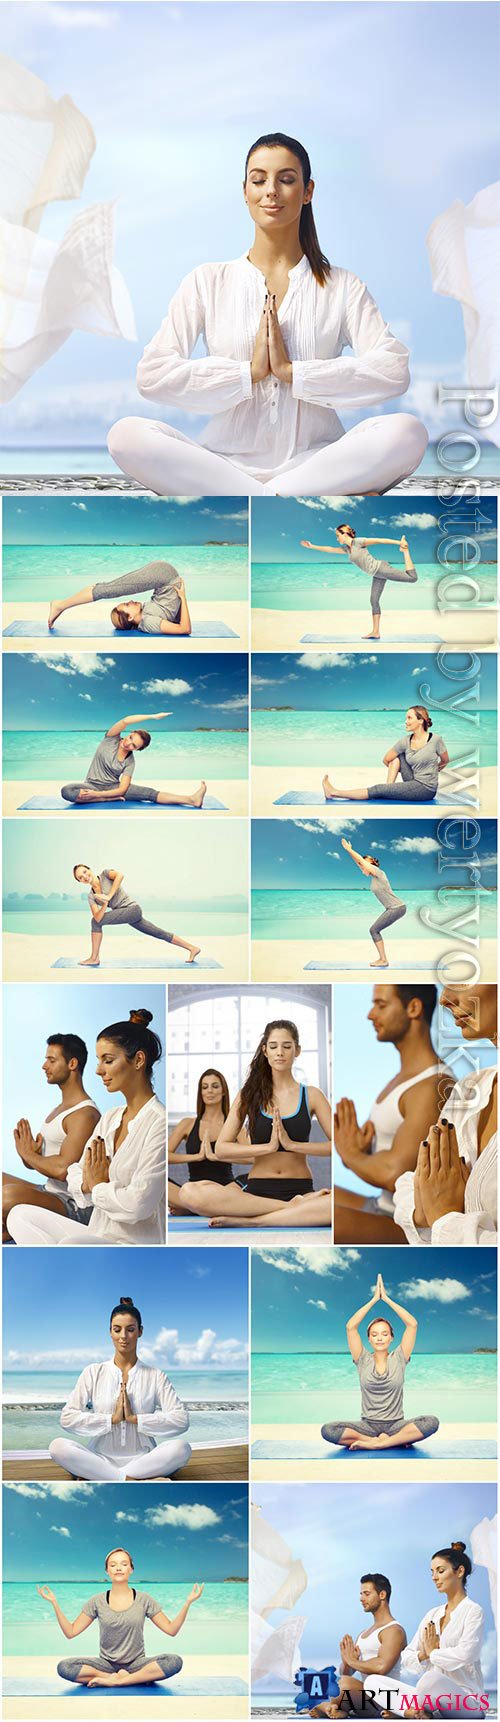 Men and women doing yoga by the sea stock photo